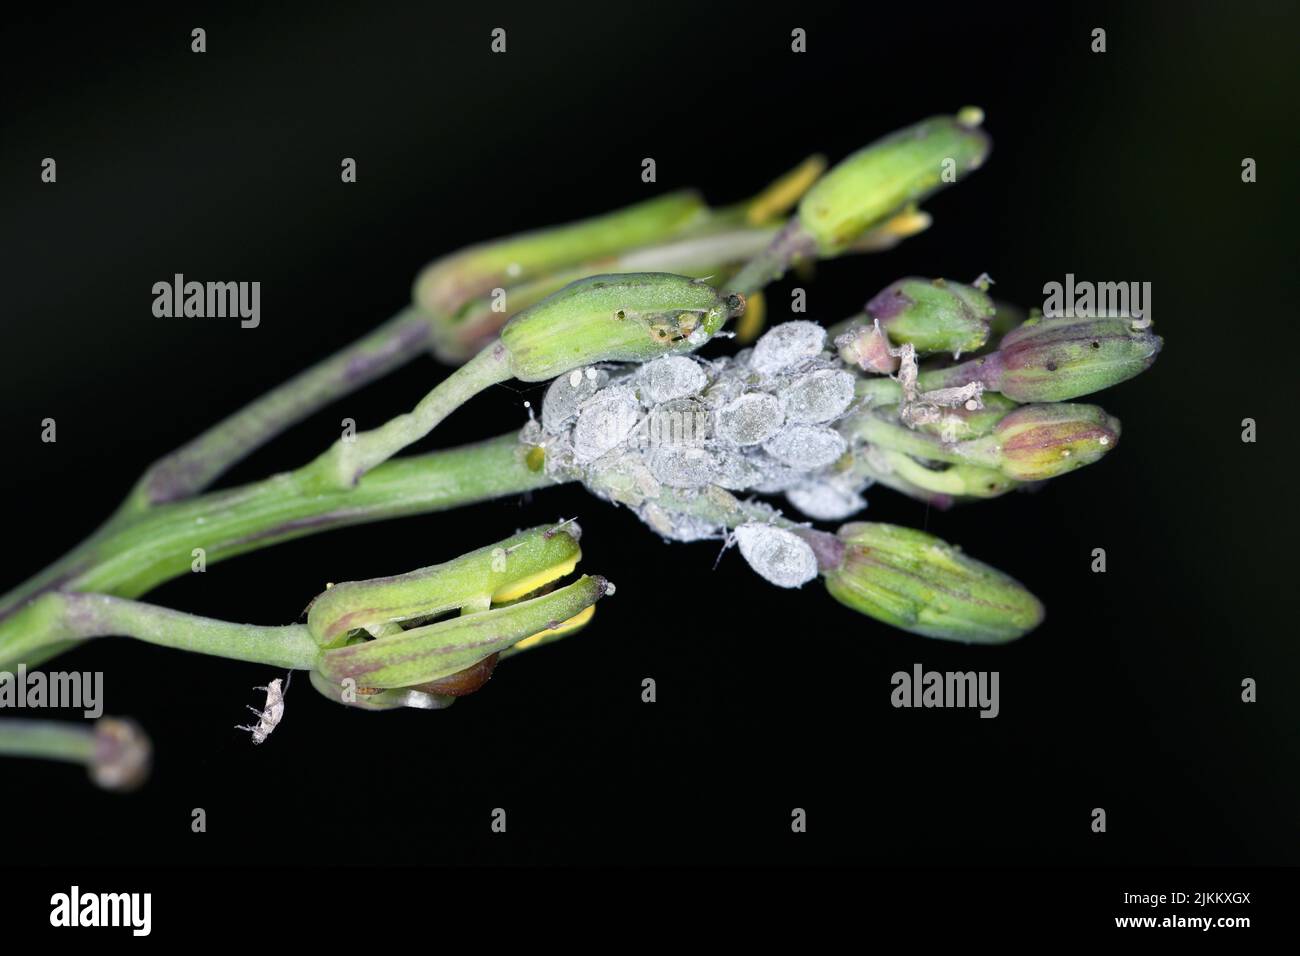 Cabbage aphids (Brevicoryne brassicae) on the flowering radish plant. Stock Photo